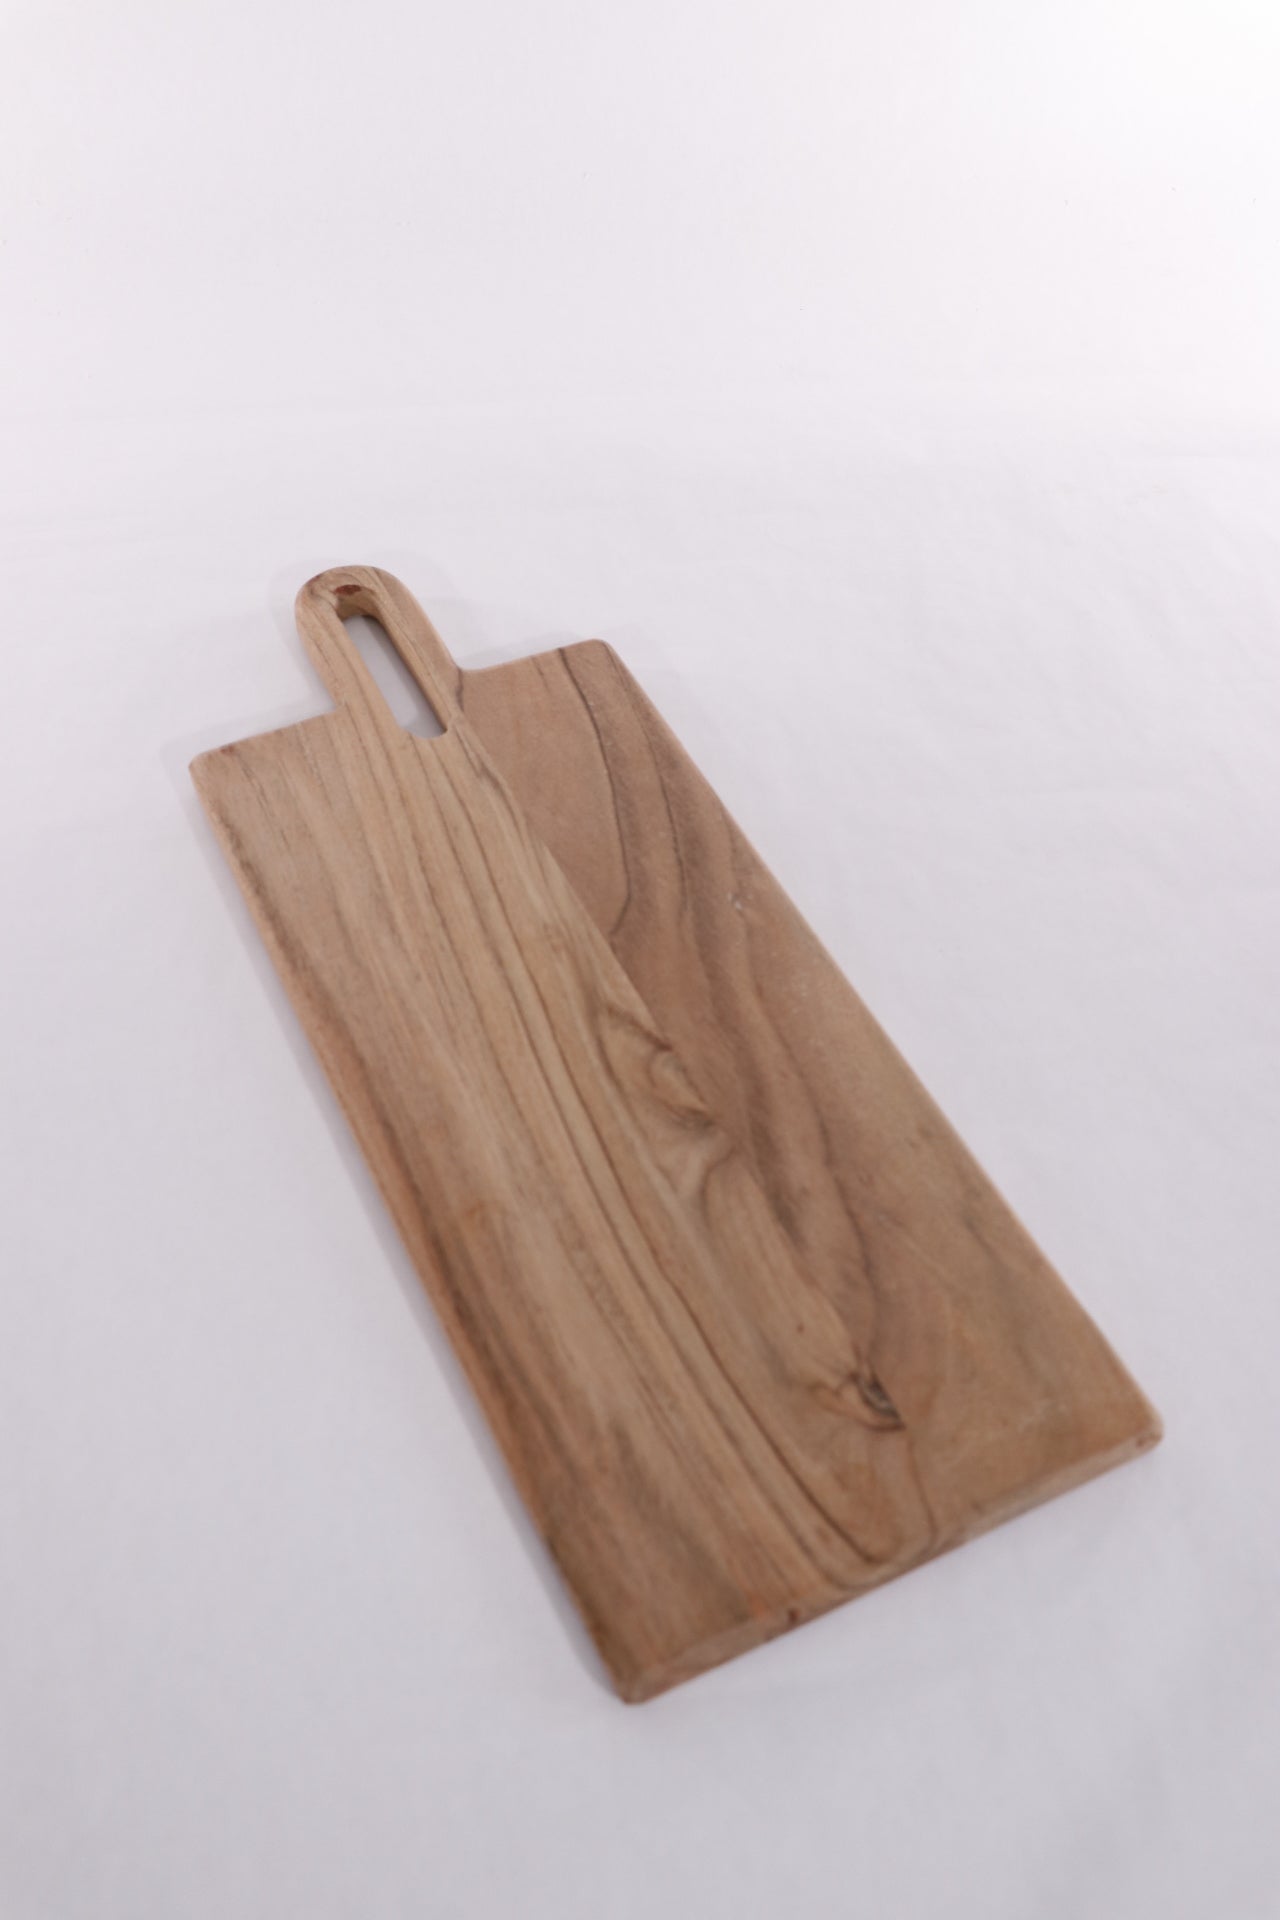 Wood serving board with handle.